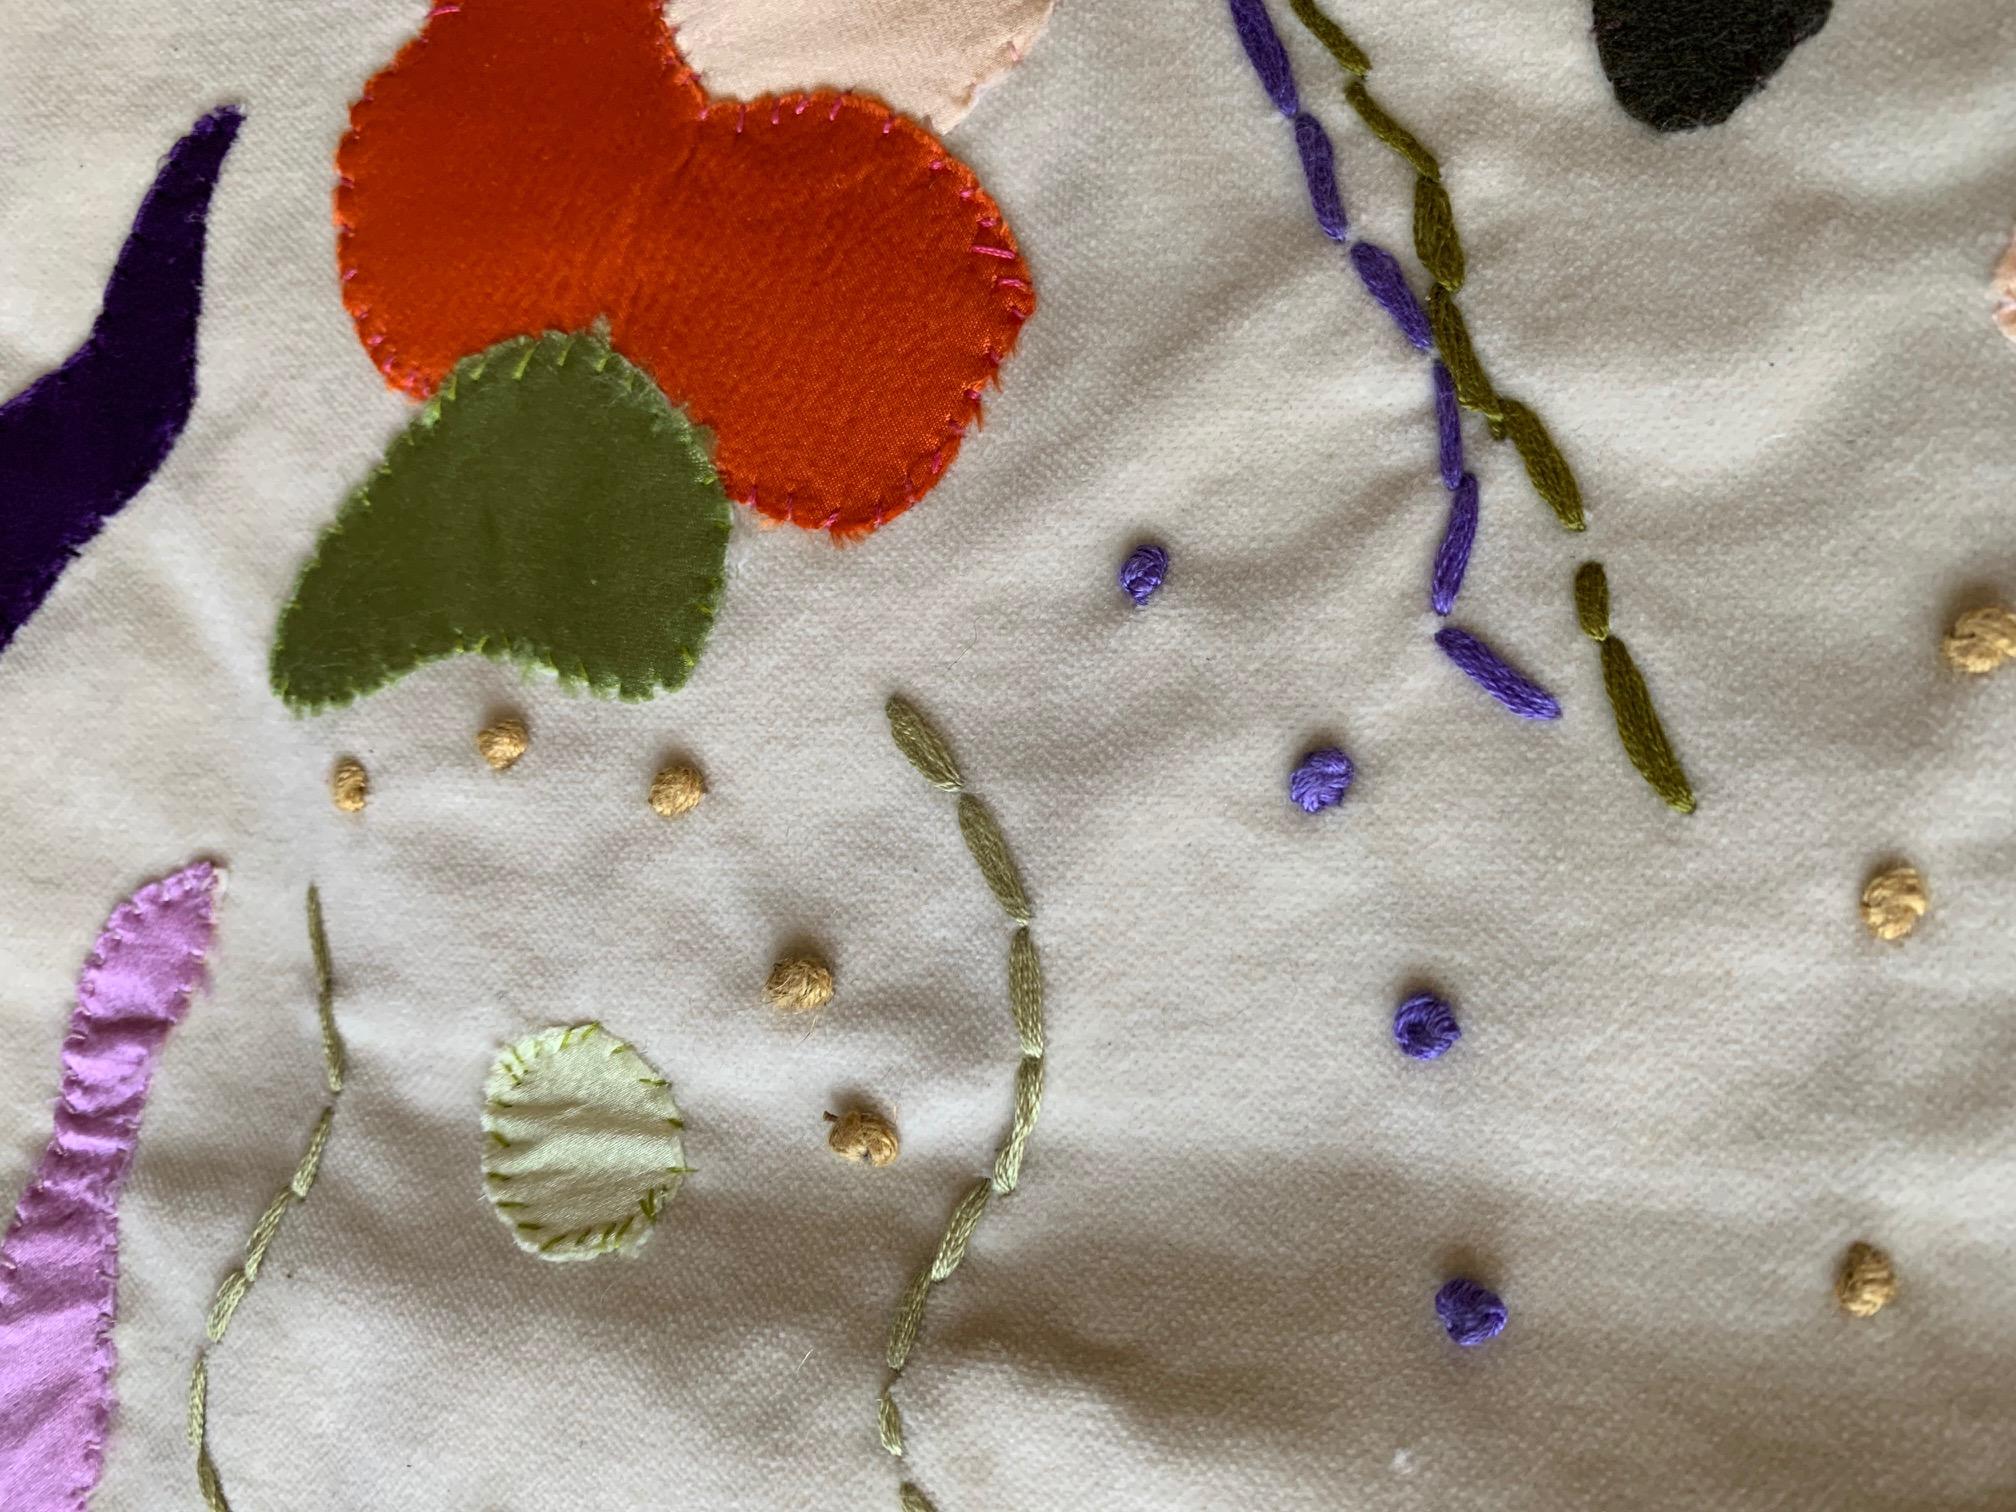 Cheerful shapes are hand-stitched onto a soft background, colorfully reminiscent of an abstract painting.

Hand Applique
Down feathers inserts, zip closure

The Maki Yamamoto Textile Studio is a modern atelier specializing in bespoke textiles.